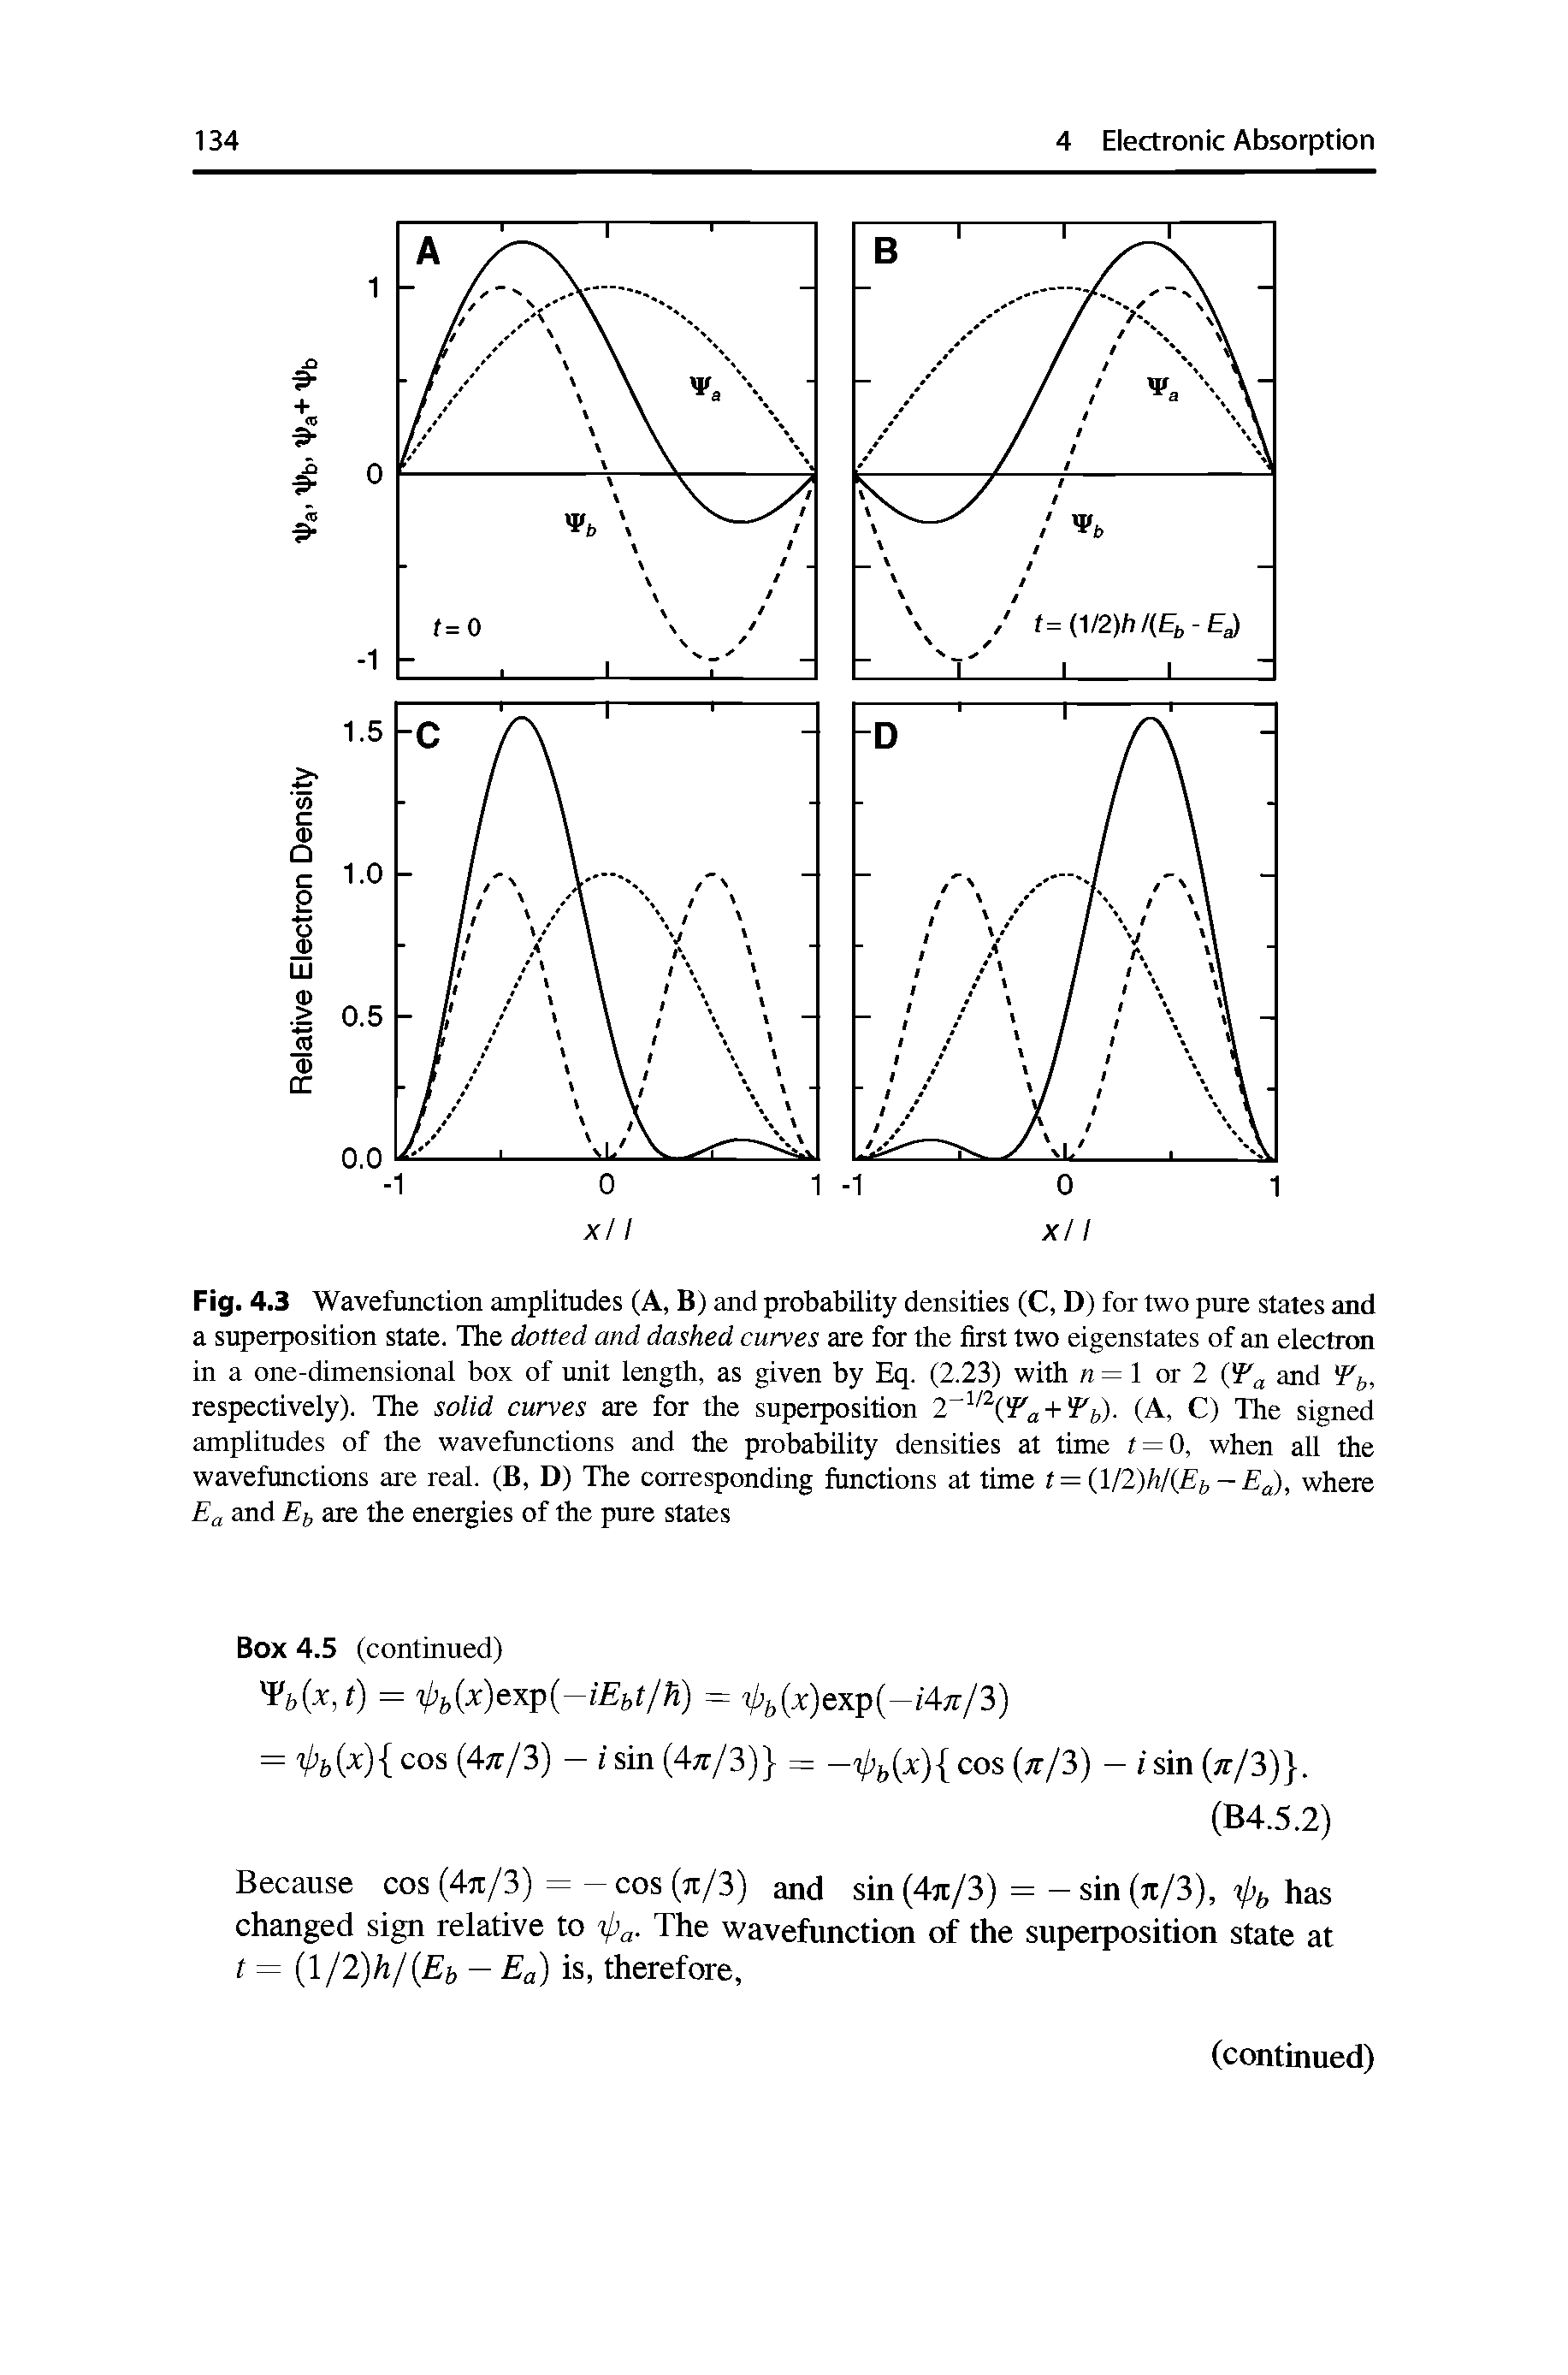 Fig. 4.3 Wavefunction amplitudes (A, B) and probability densities (C, D) for two pure states and a superposition state. The dotted and dashed curves are for the first two eigenstates of an electron in a one-dimensional box of unit length, as given by Eq. (2.23) with n= or 2 and respectively). The solid curves are for the superposition 2 Ta + l b)- (A, C) The signed amplitudes of the wavefunctions and the probability densities at time t = 0, when all the wavefunctions are real. (B, D) The corresponding functions at time t = (ll2)h/ Ei, — Ea), where Ea and Ef, are the energies of the pure states...